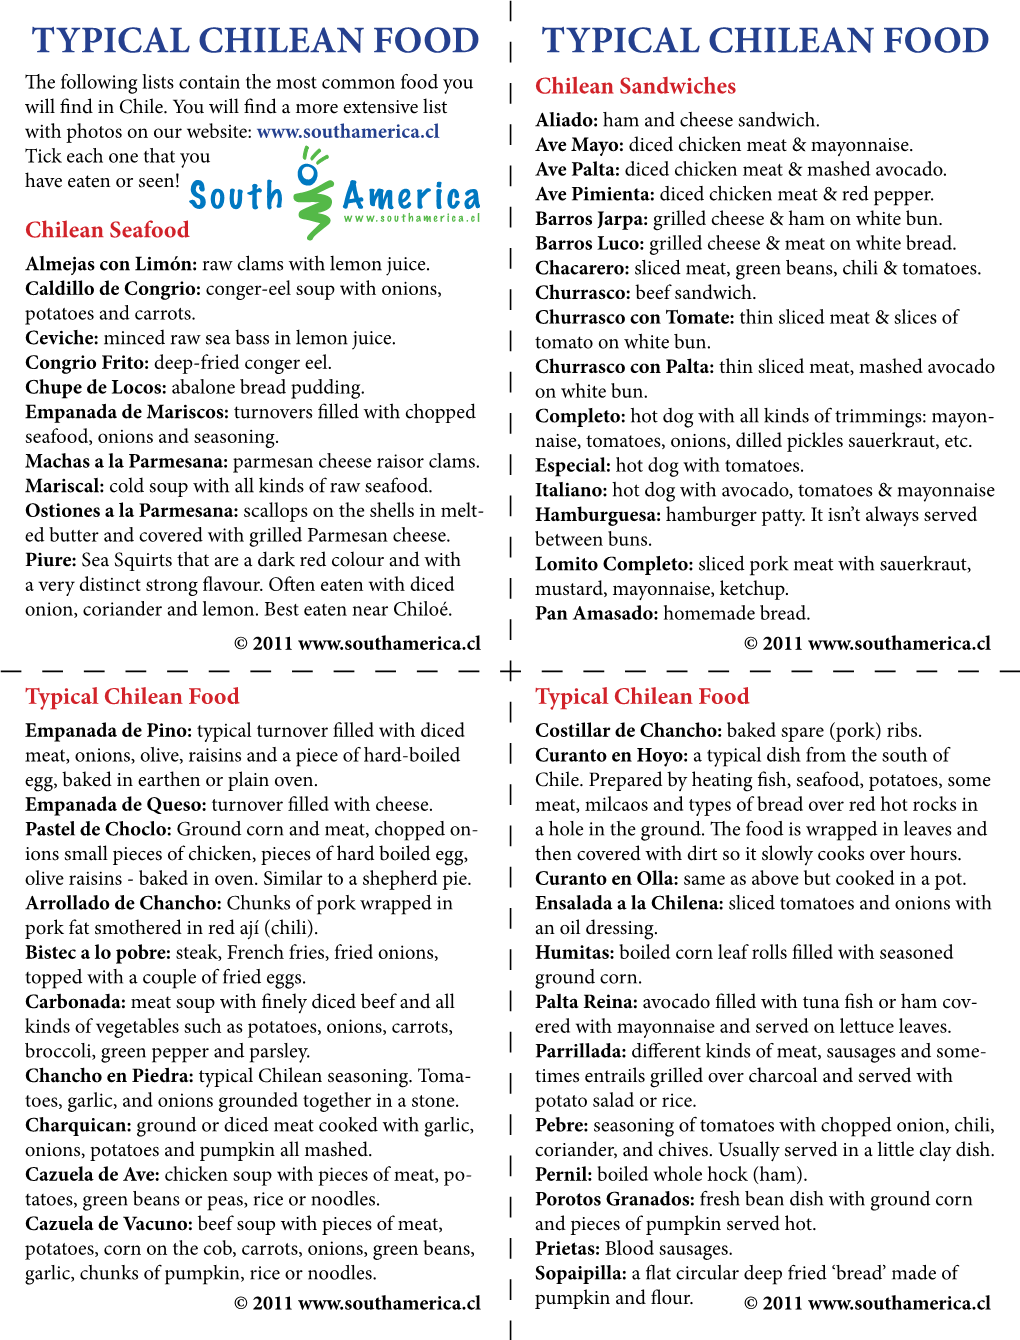 TYPICAL CHILEAN FOOD TYPICAL CHILEAN FOOD the Following Lists Contain the Most Common Food You Chilean Sandwiches Will Find in Chile